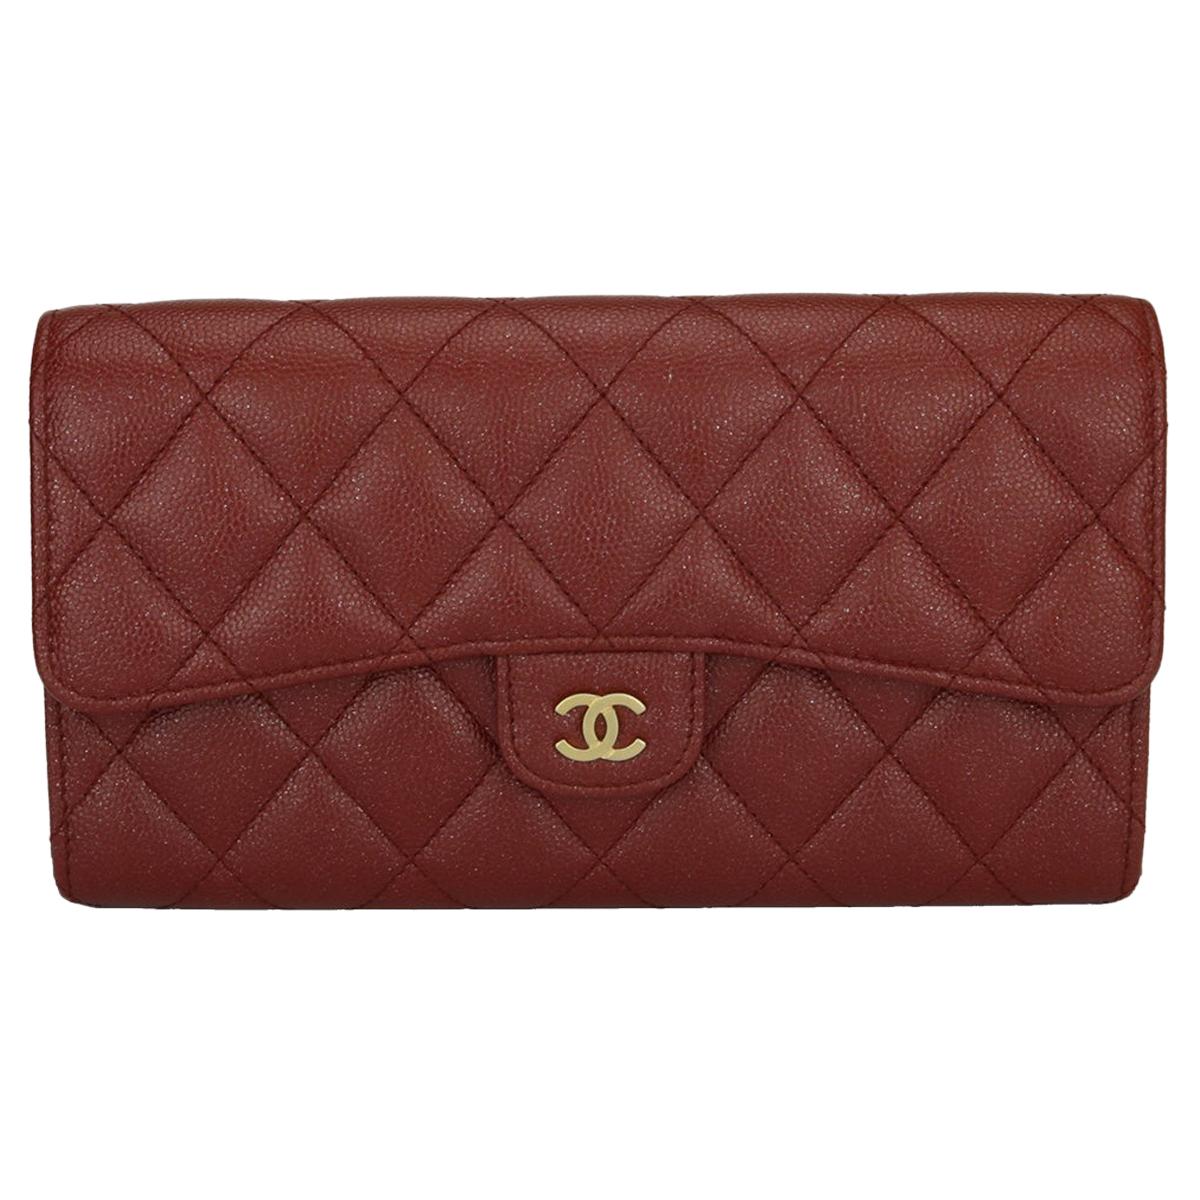 CHANEL Flap Wallet Burgundy Caviar Iridescent with Brushed Gold Hardware 2018